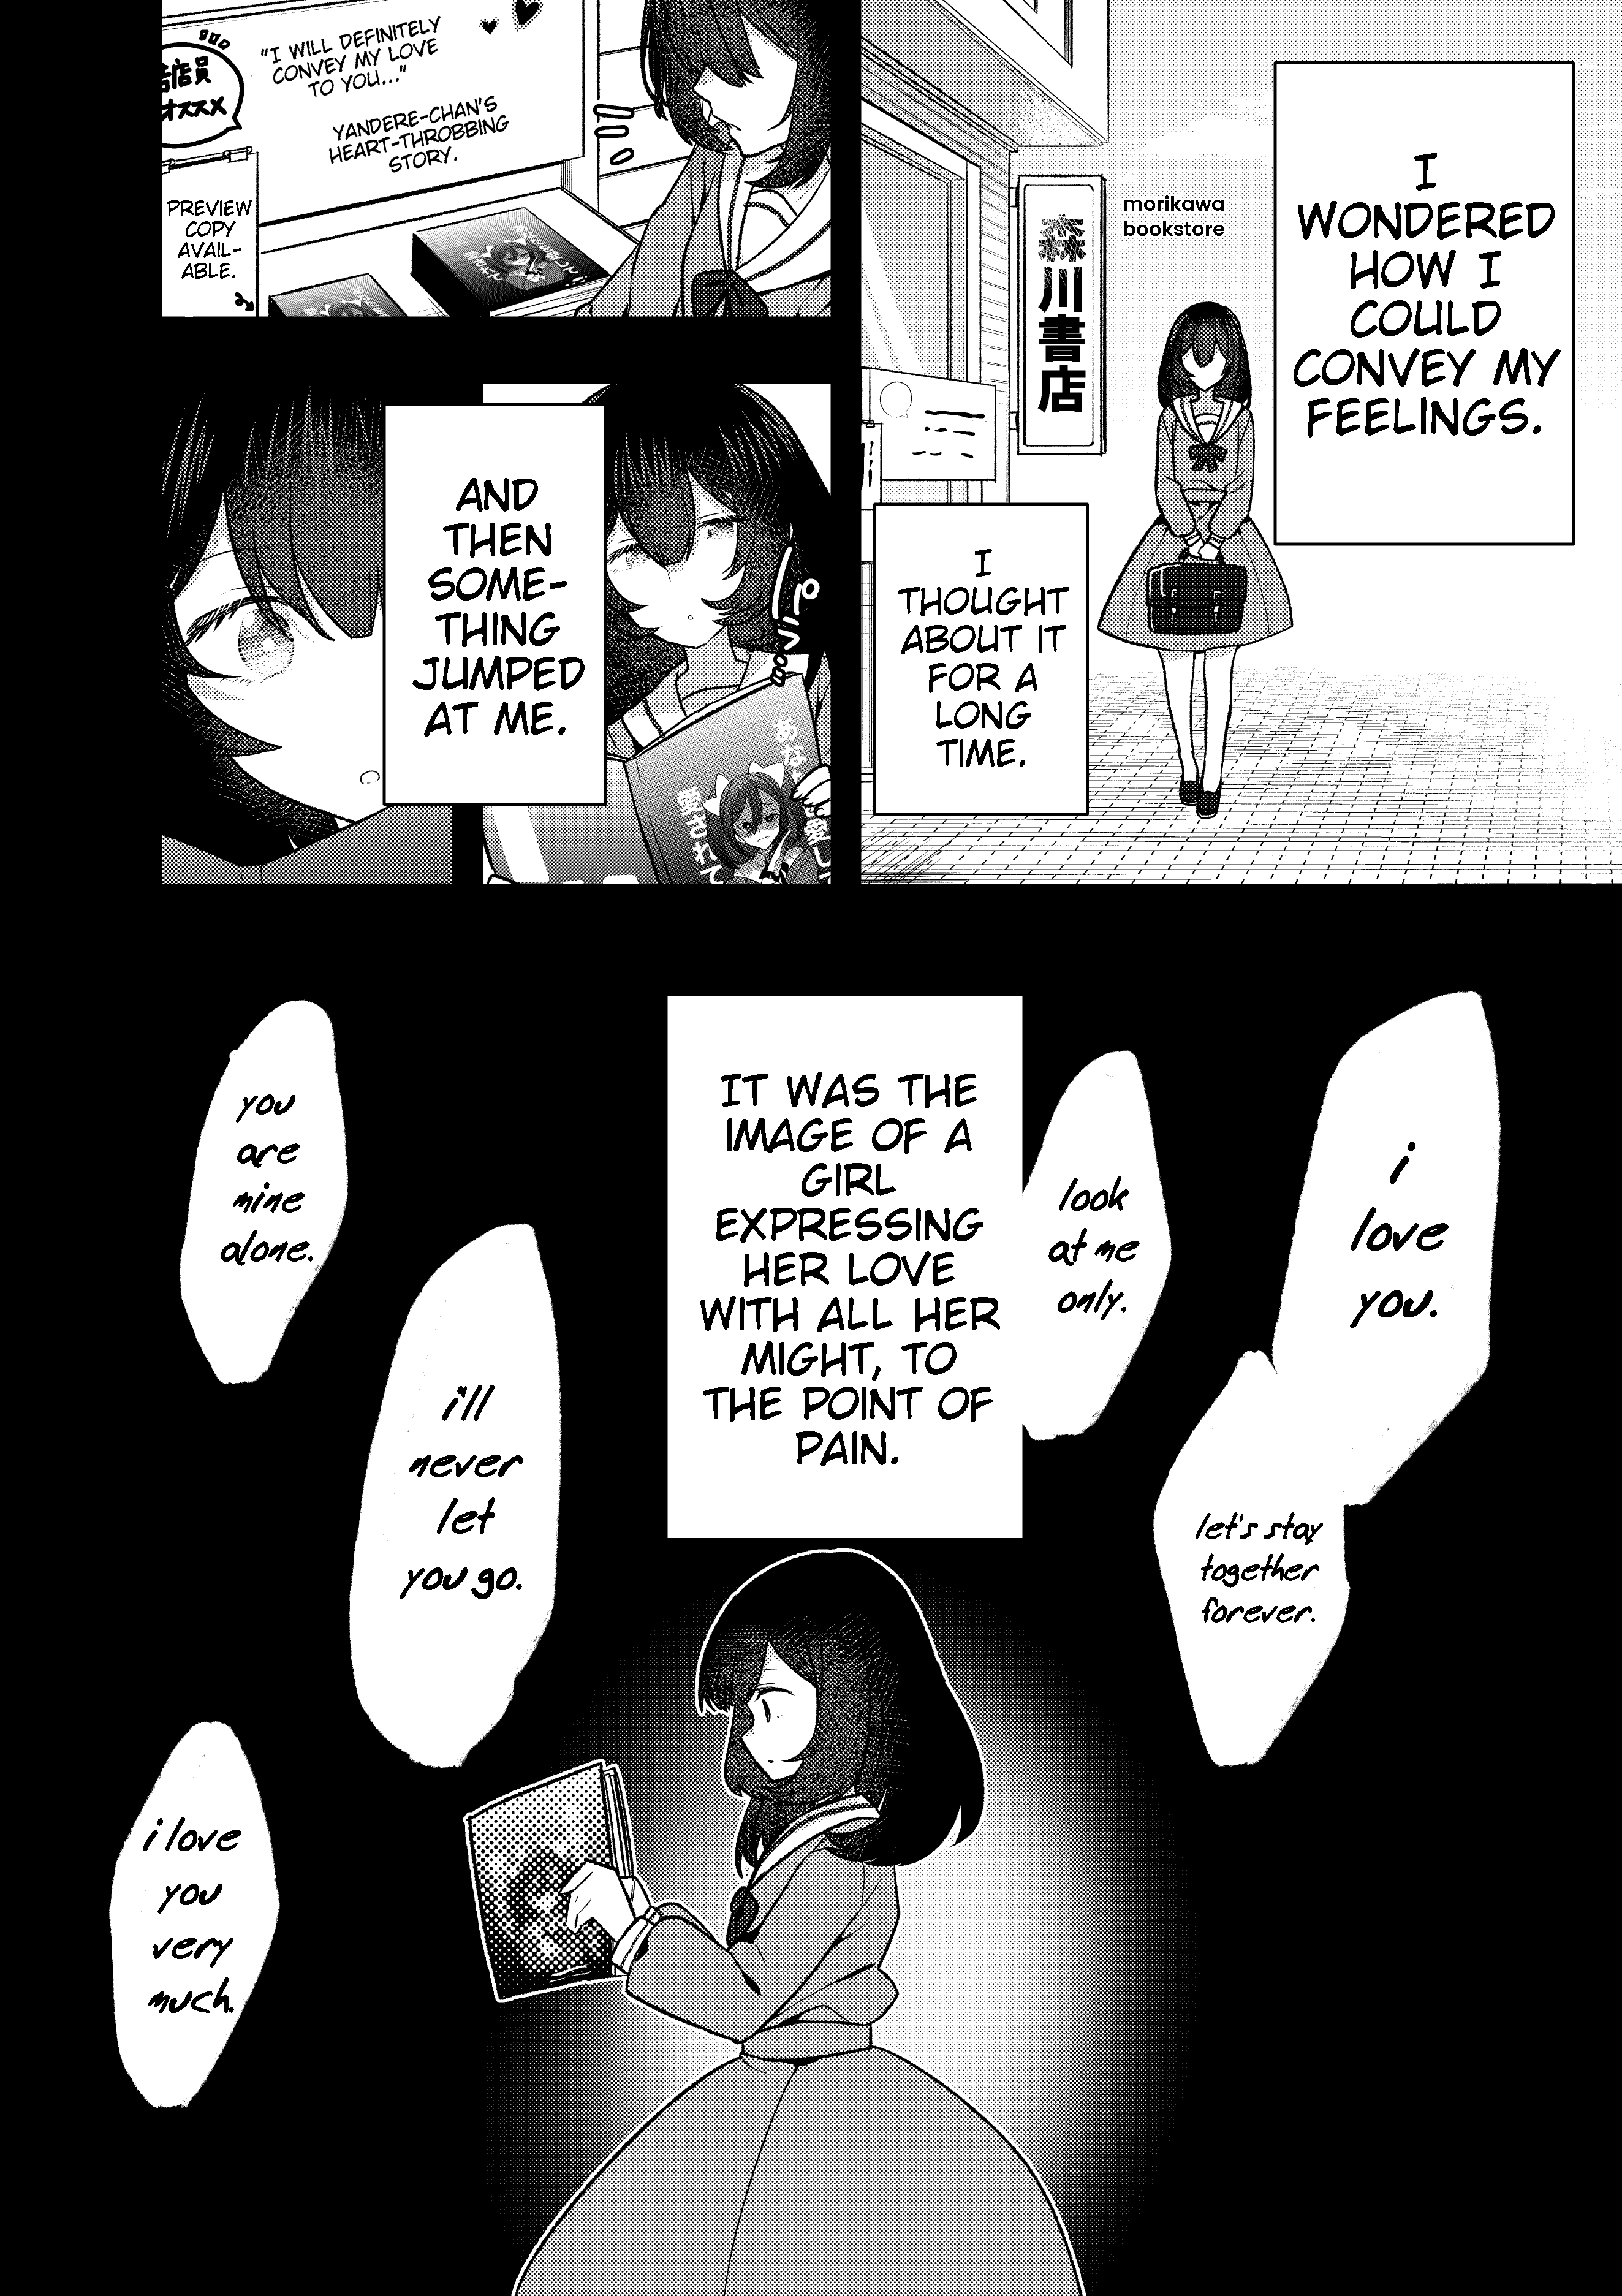 A Yandere Girl Who Is Not Very Good At Being Yandere - Page 2